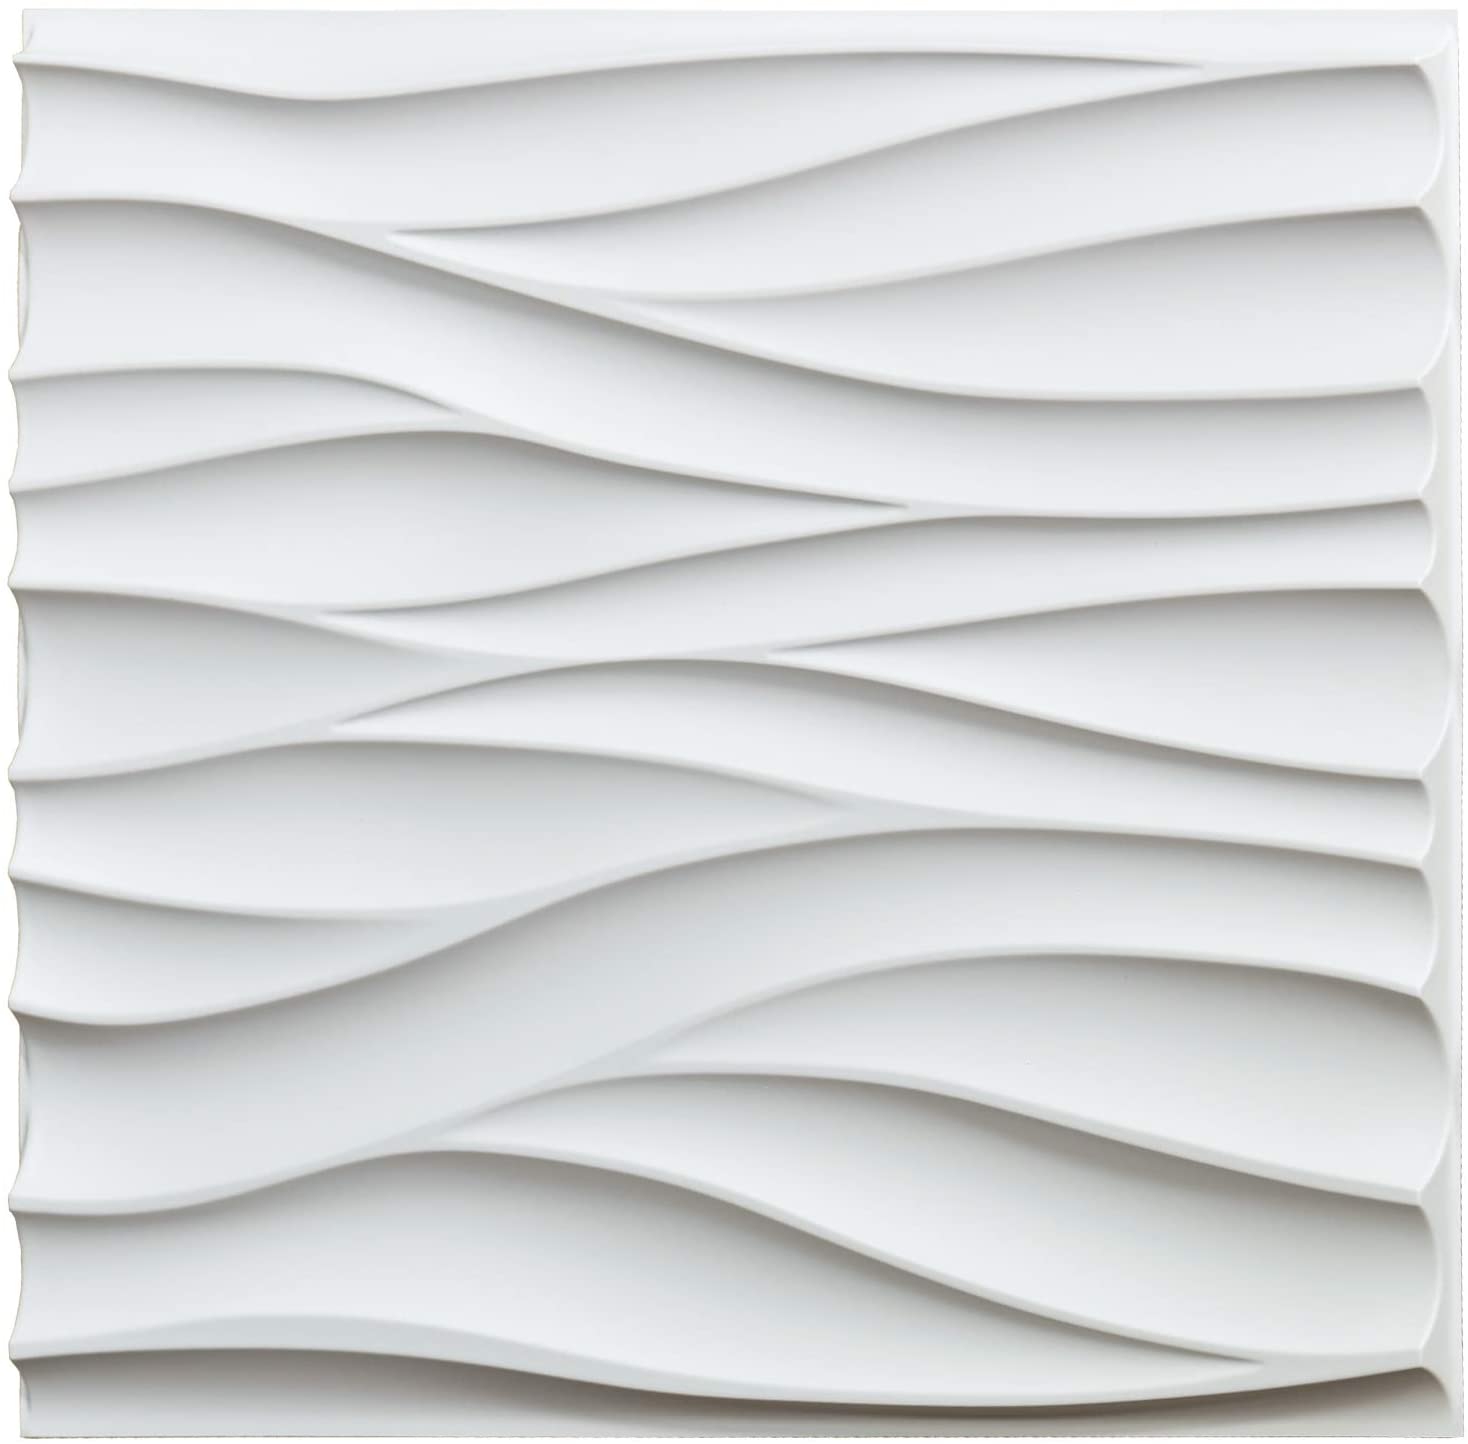 A10046 - Textures 3D Wall Panels White Wave Wall Design, 12 Tiles 32 SF